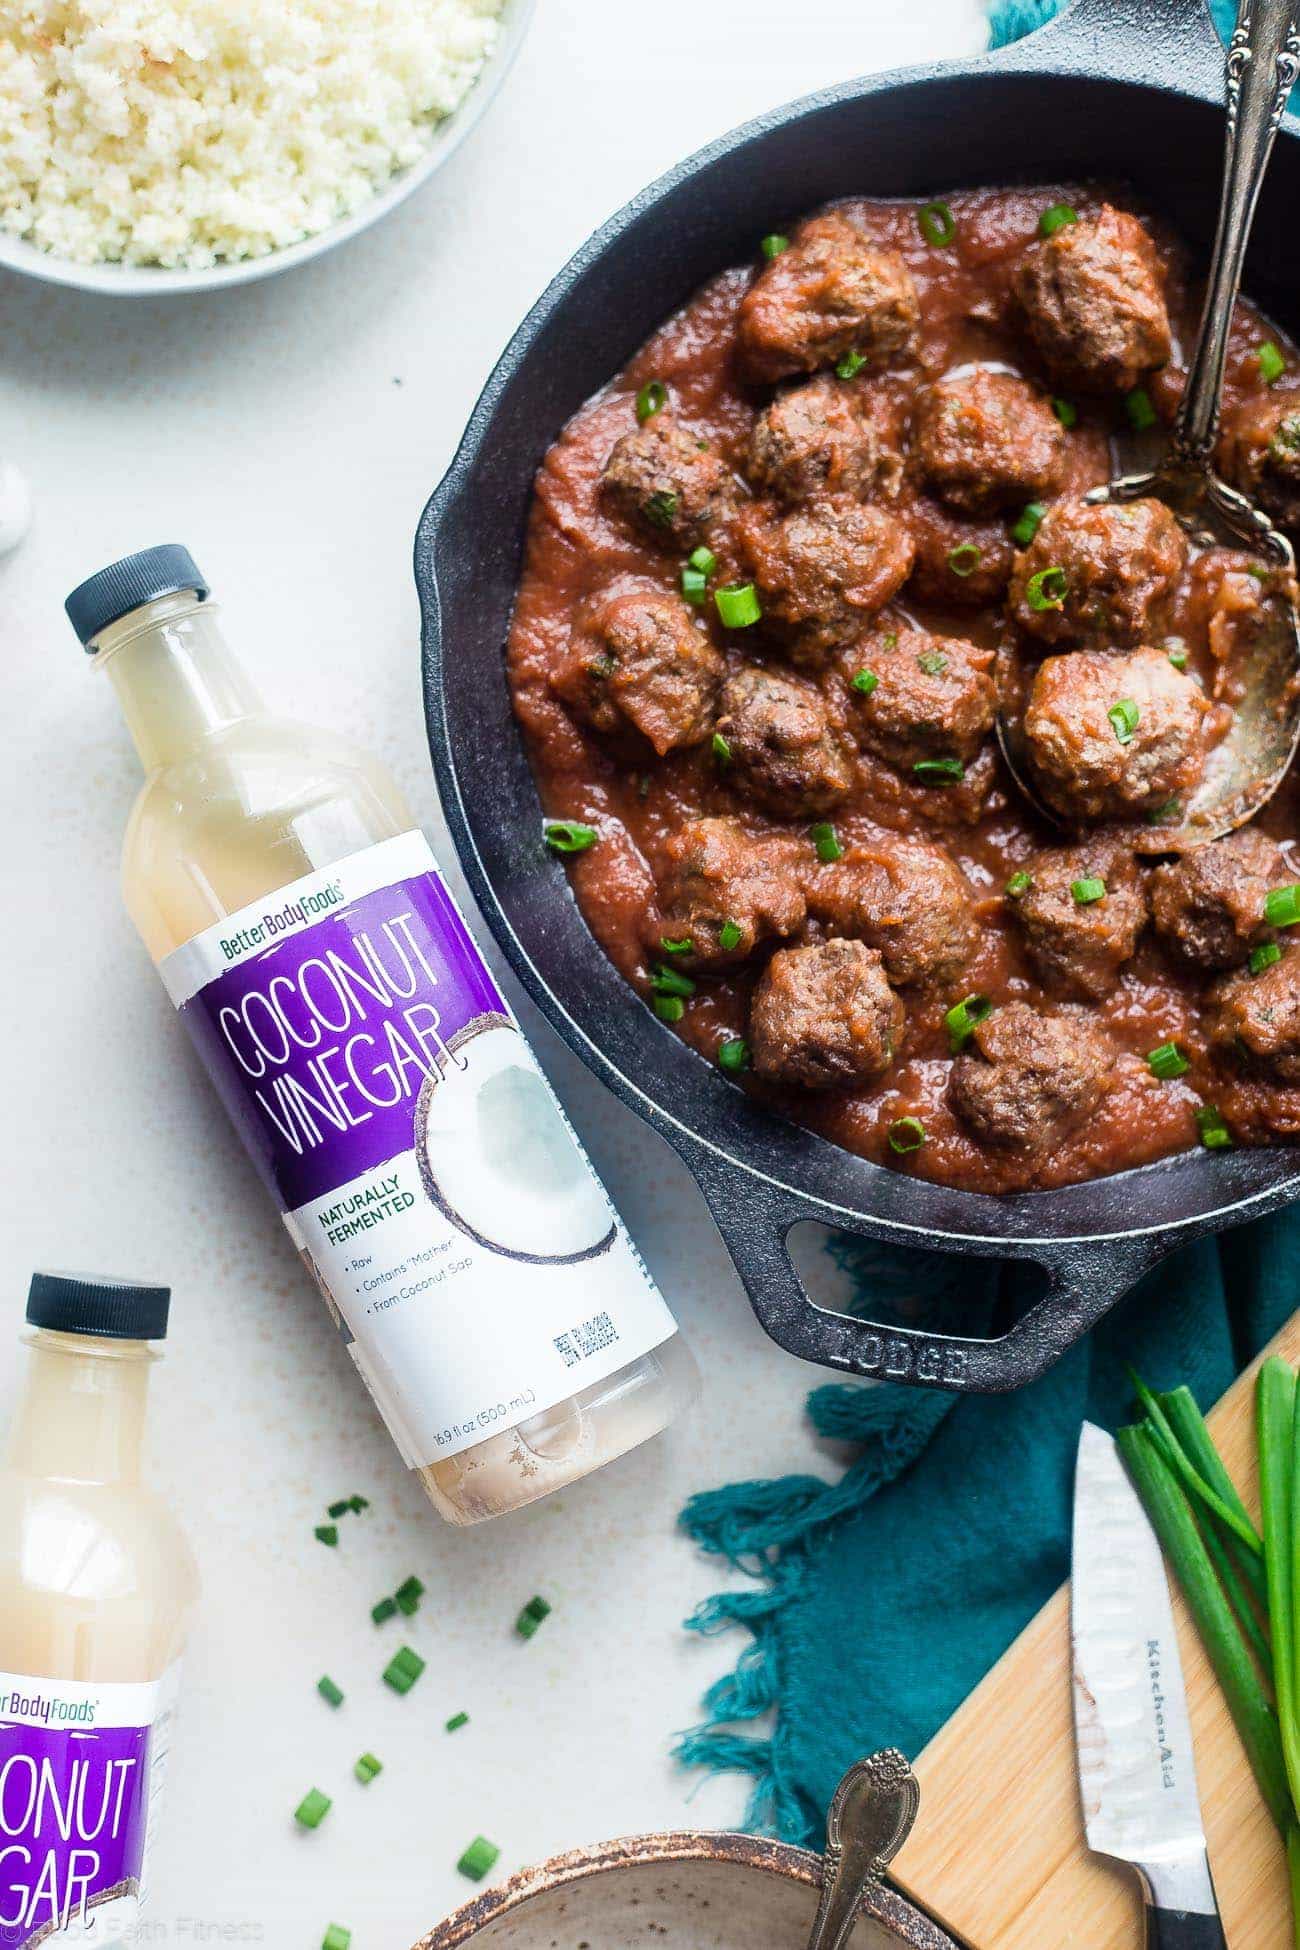 Whole30 Sweet and Sour Paleo Meatballs - This paleo meatballs recipe is a healthy remake of a classic recipe that is gluten free and whole30 complaint! They're a weeknight meal that everyone will love! | Foodfaithfitness.com | @FoodFaithFit